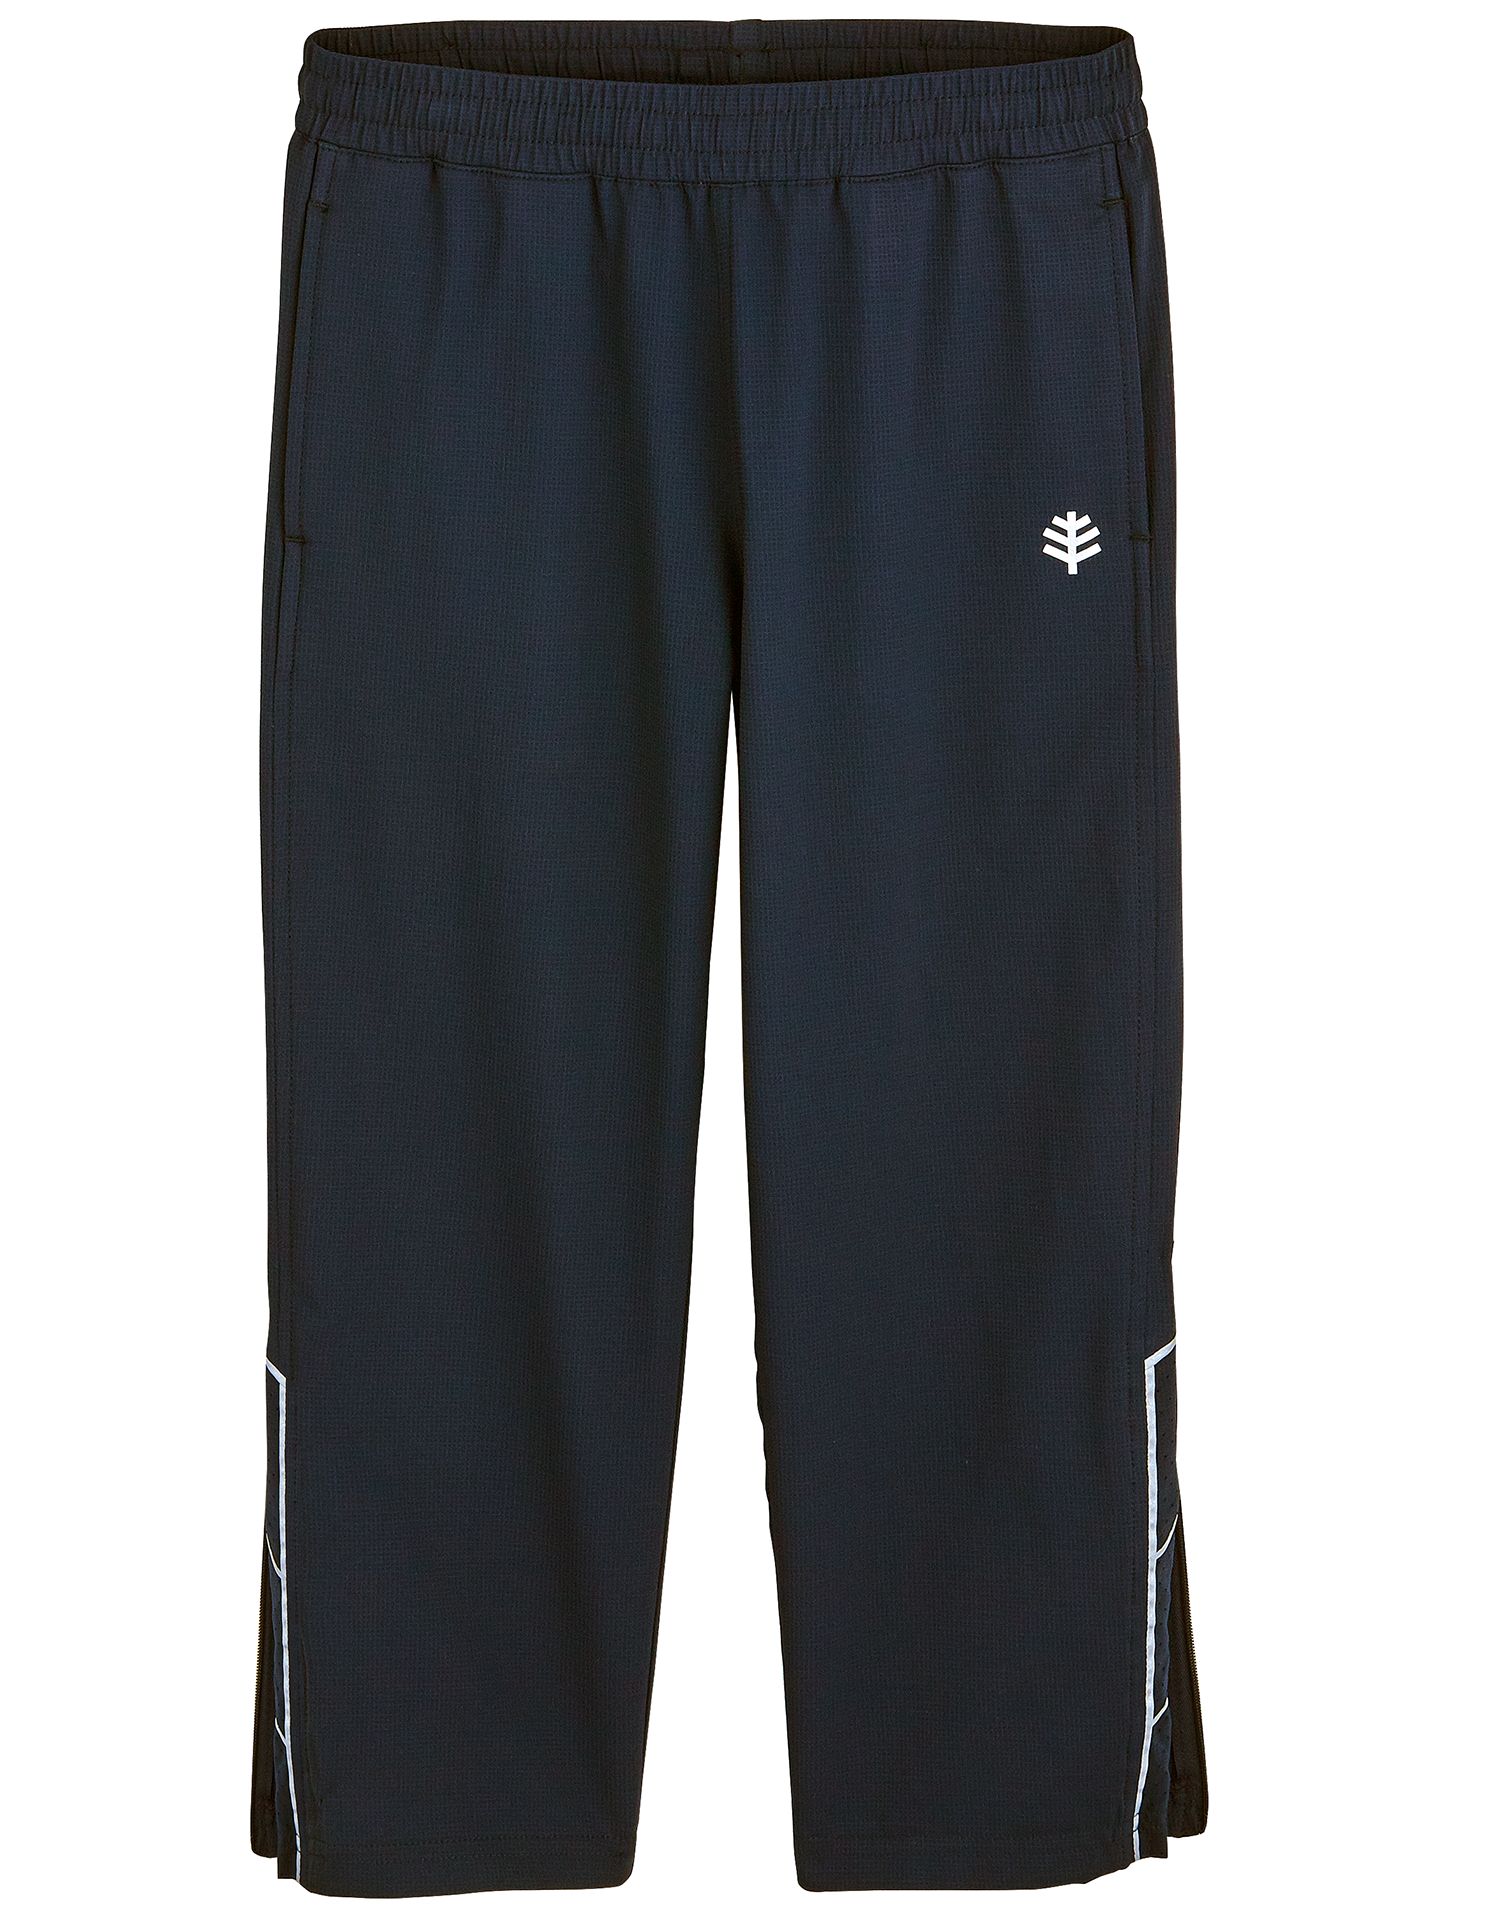 Coolibar - UV Sports pants for boys - Outpace - Navy